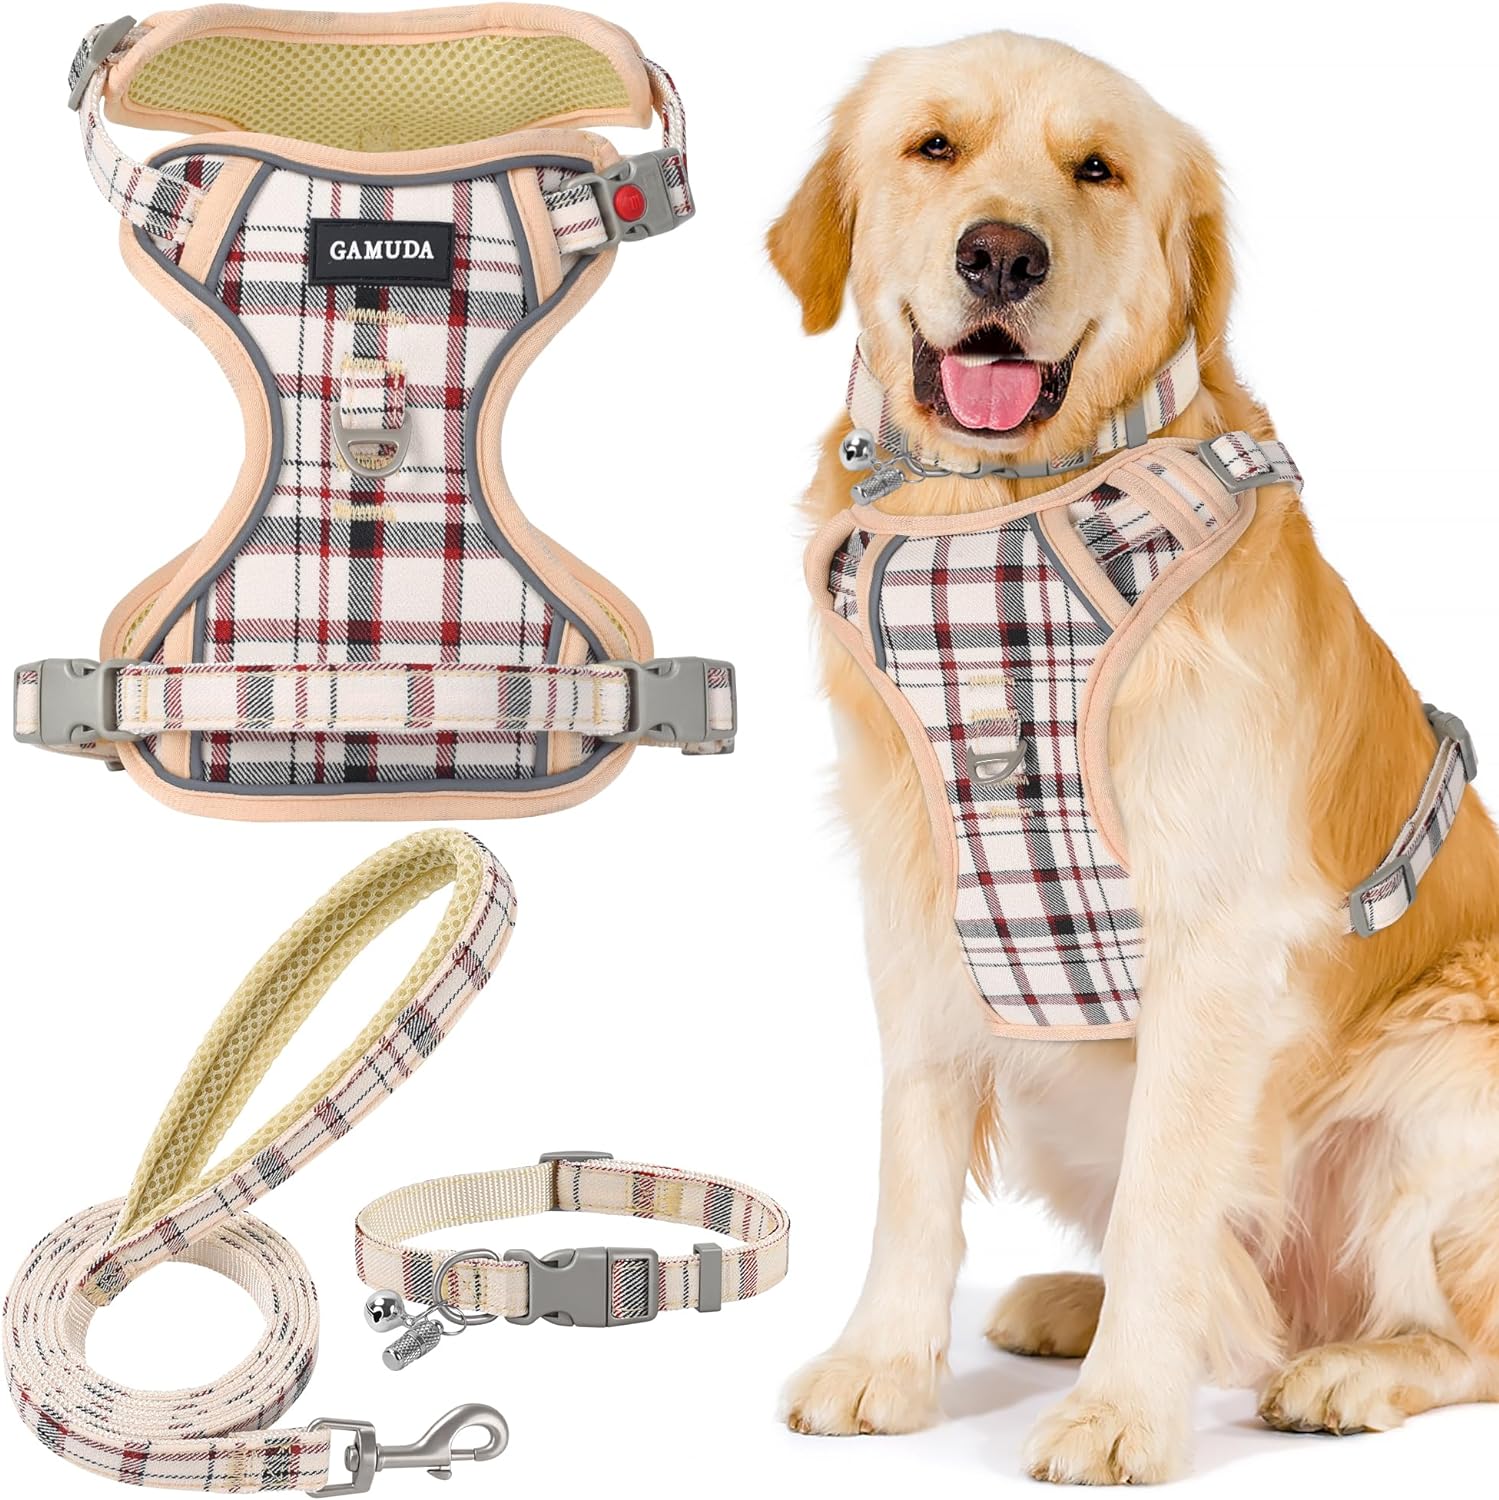 GAMUDA Pet Harness Collar and Leash Set, Horse Breast Collars, No Chock No Pull Adjustable Vest Harnesses Plaid Reflective for Medium Dog, Cat, Small Horse, Small Bull and Pig (Beige, S)